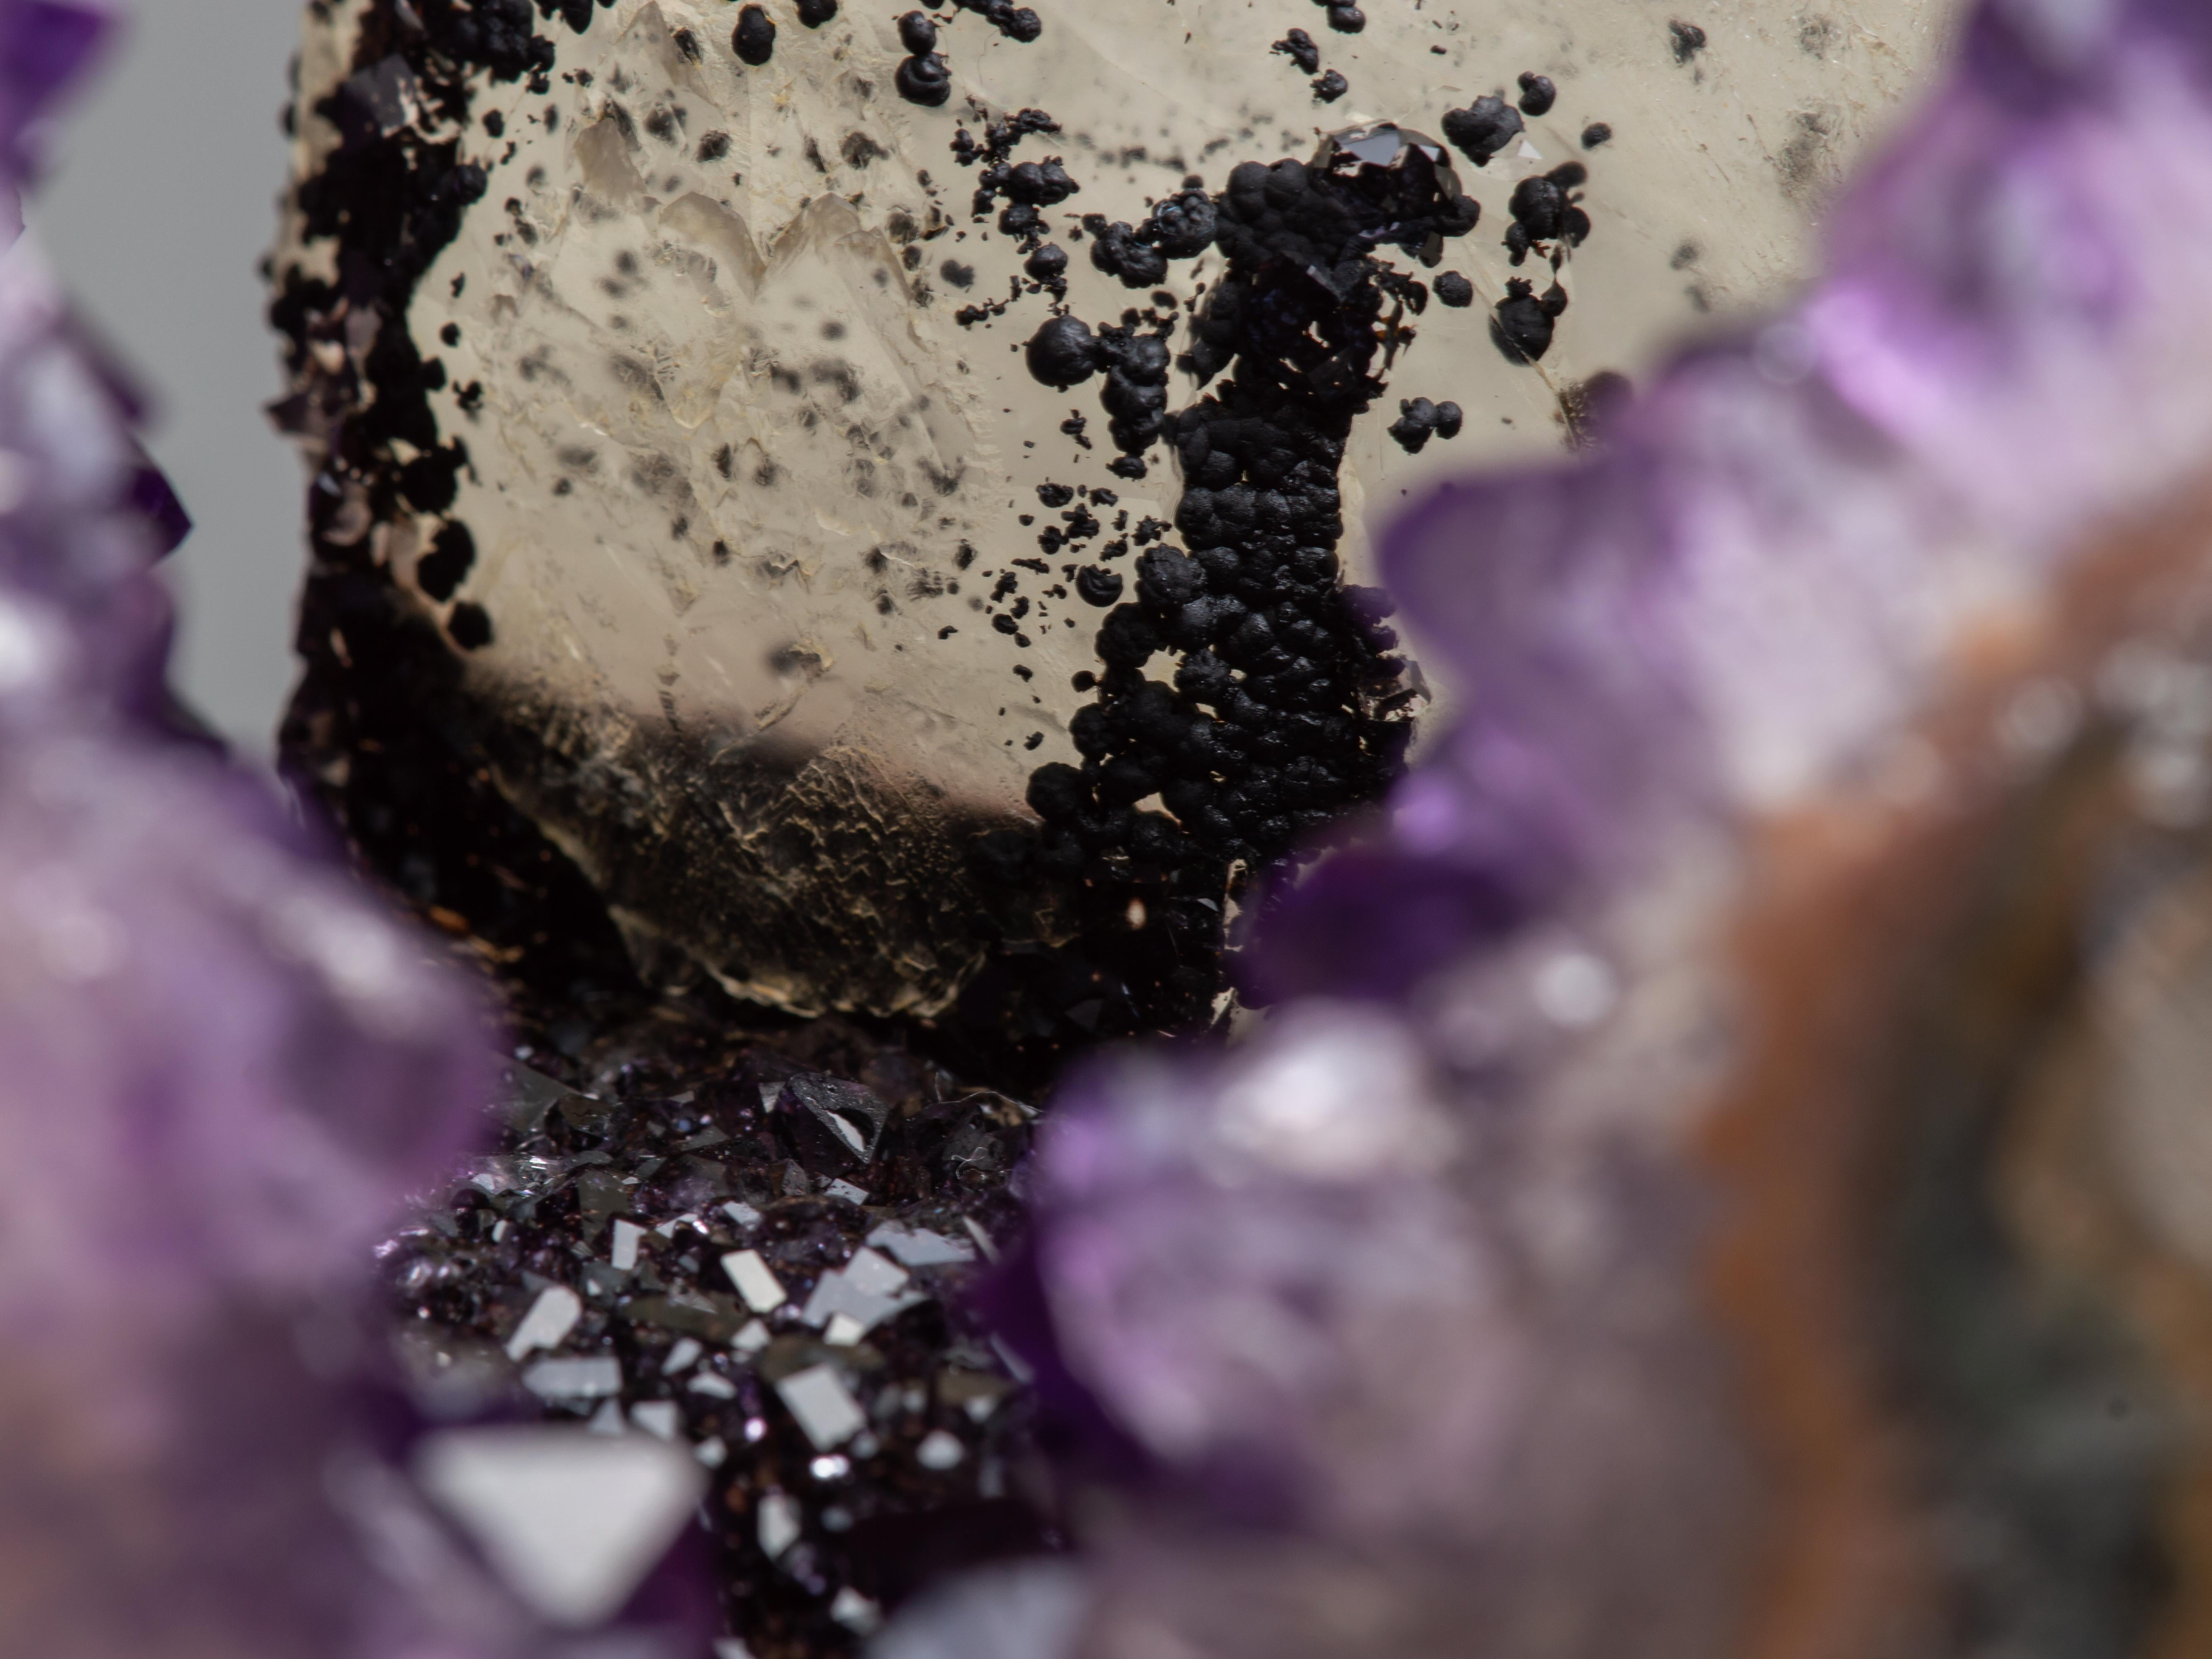 Angel Shaped Amethyst Crystals and Calcite mineral formation 2